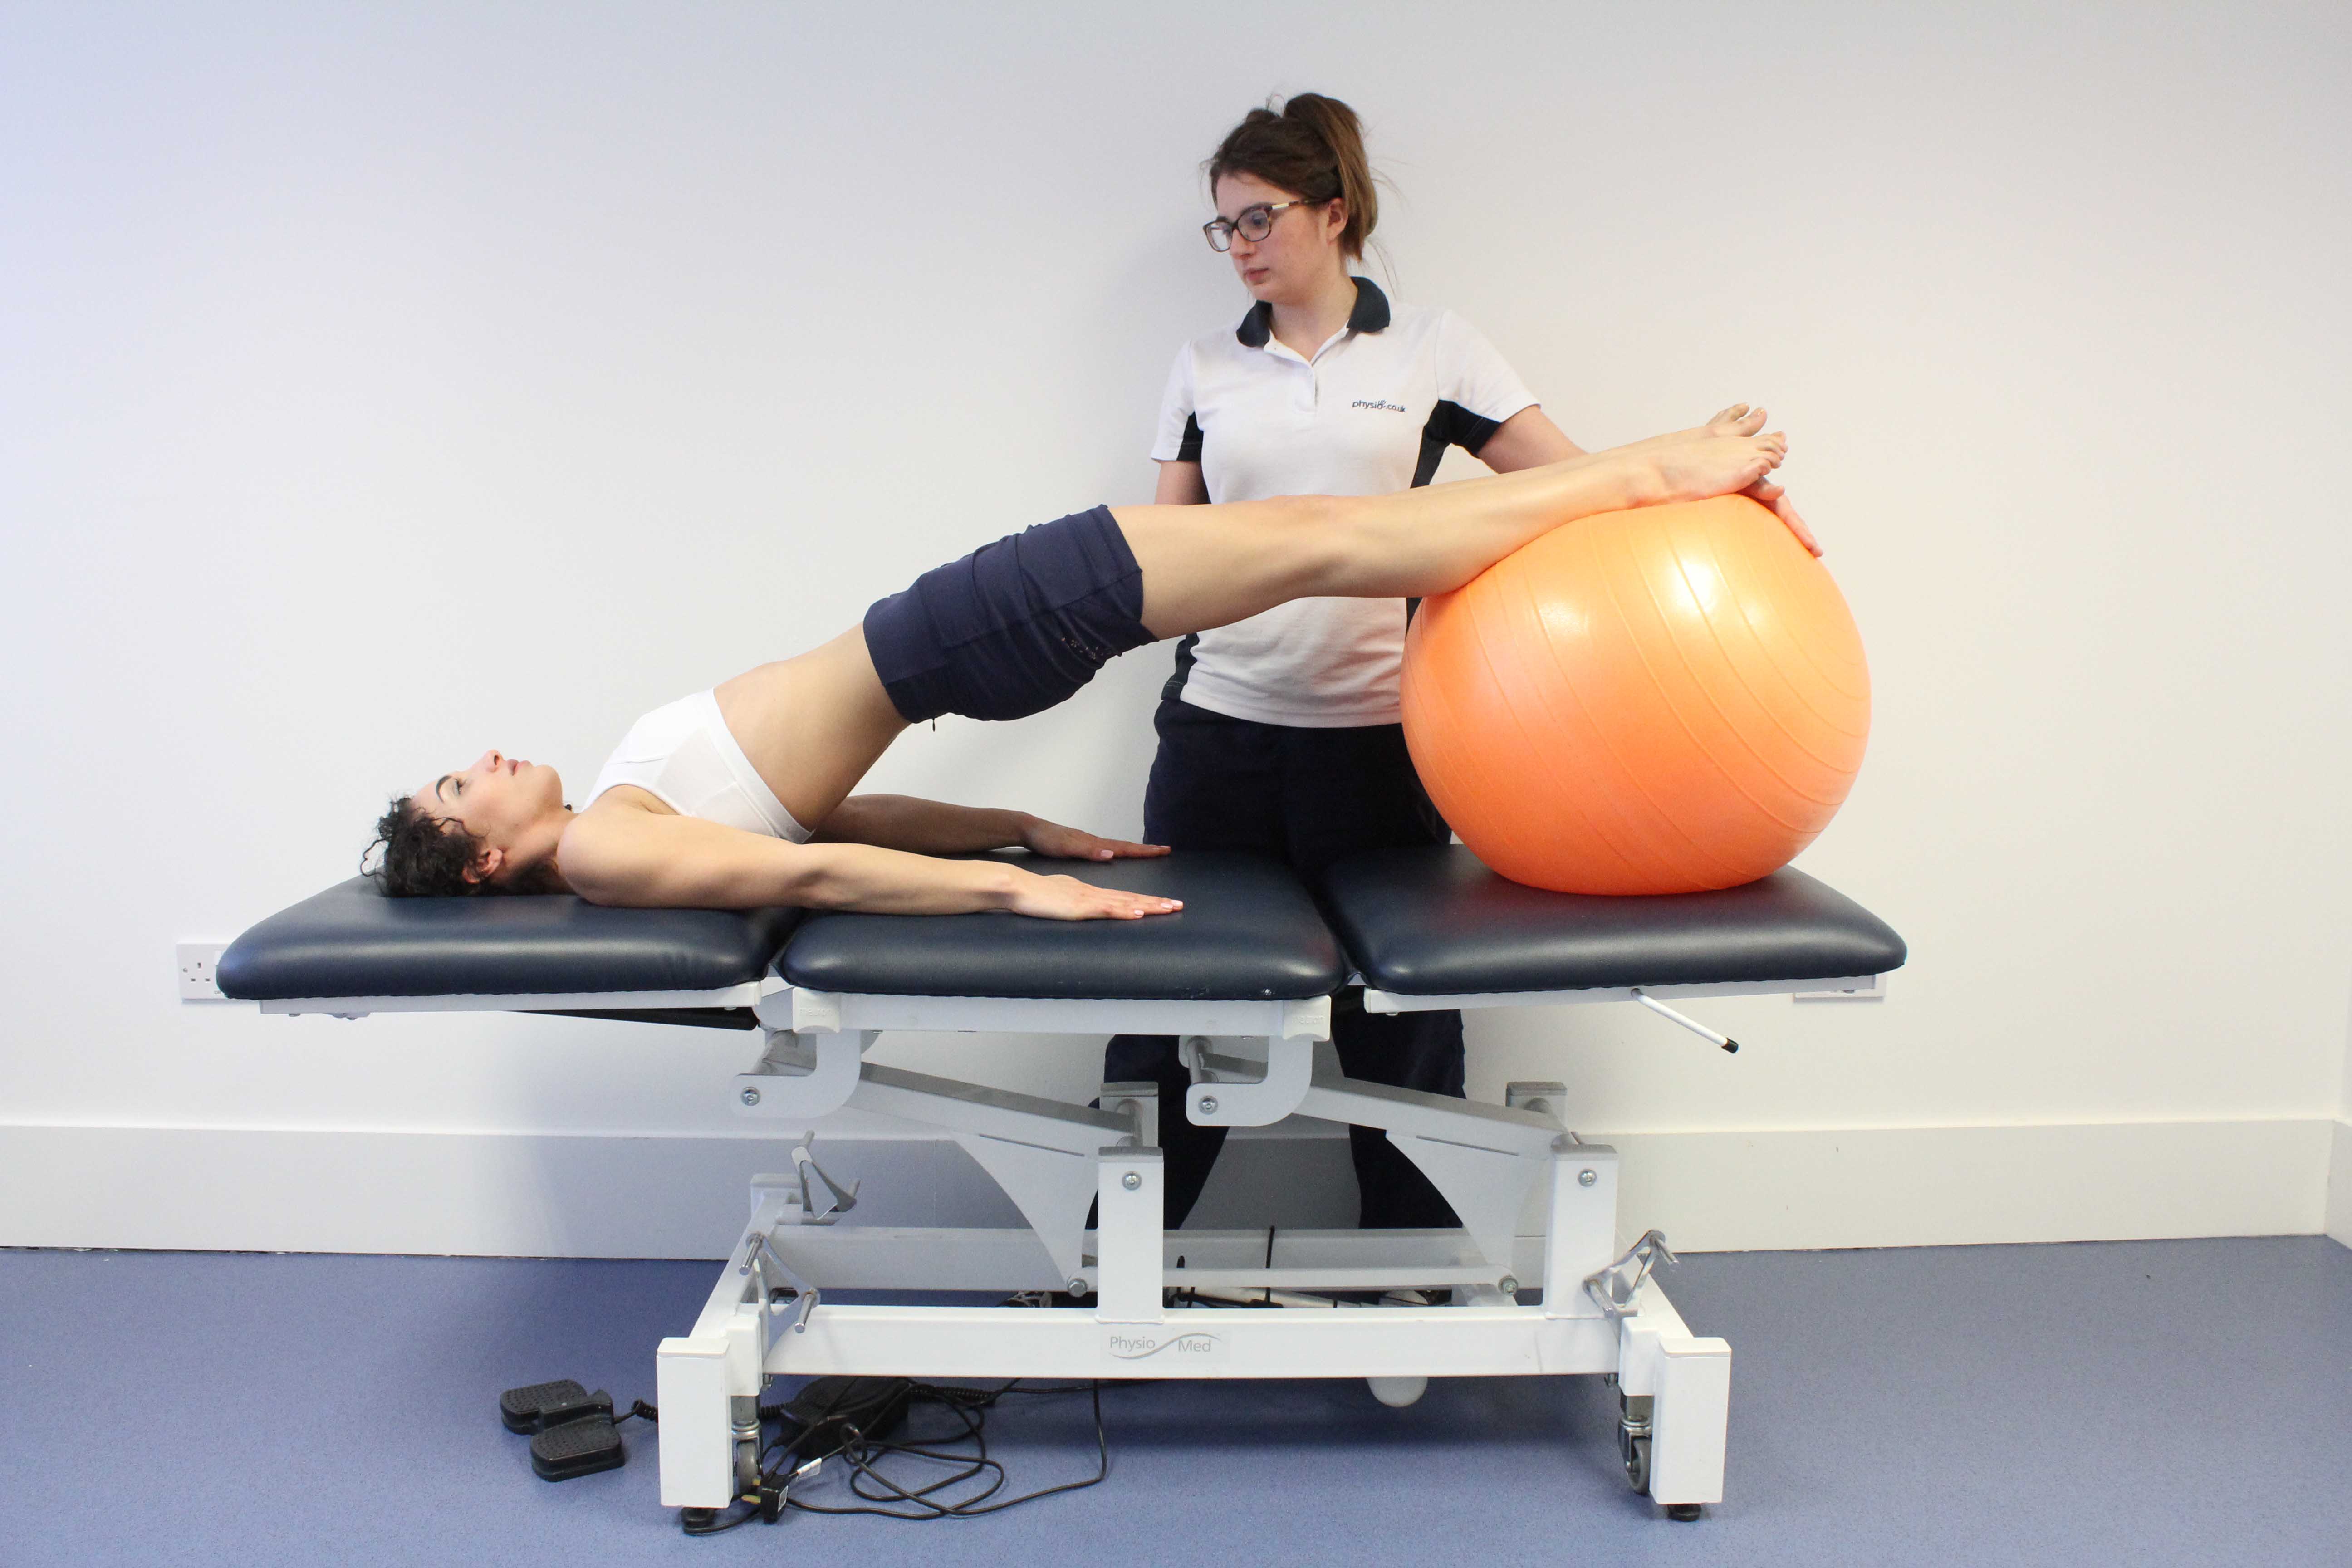 Bridging exercises supervised by a physiotherapist to improve core stability